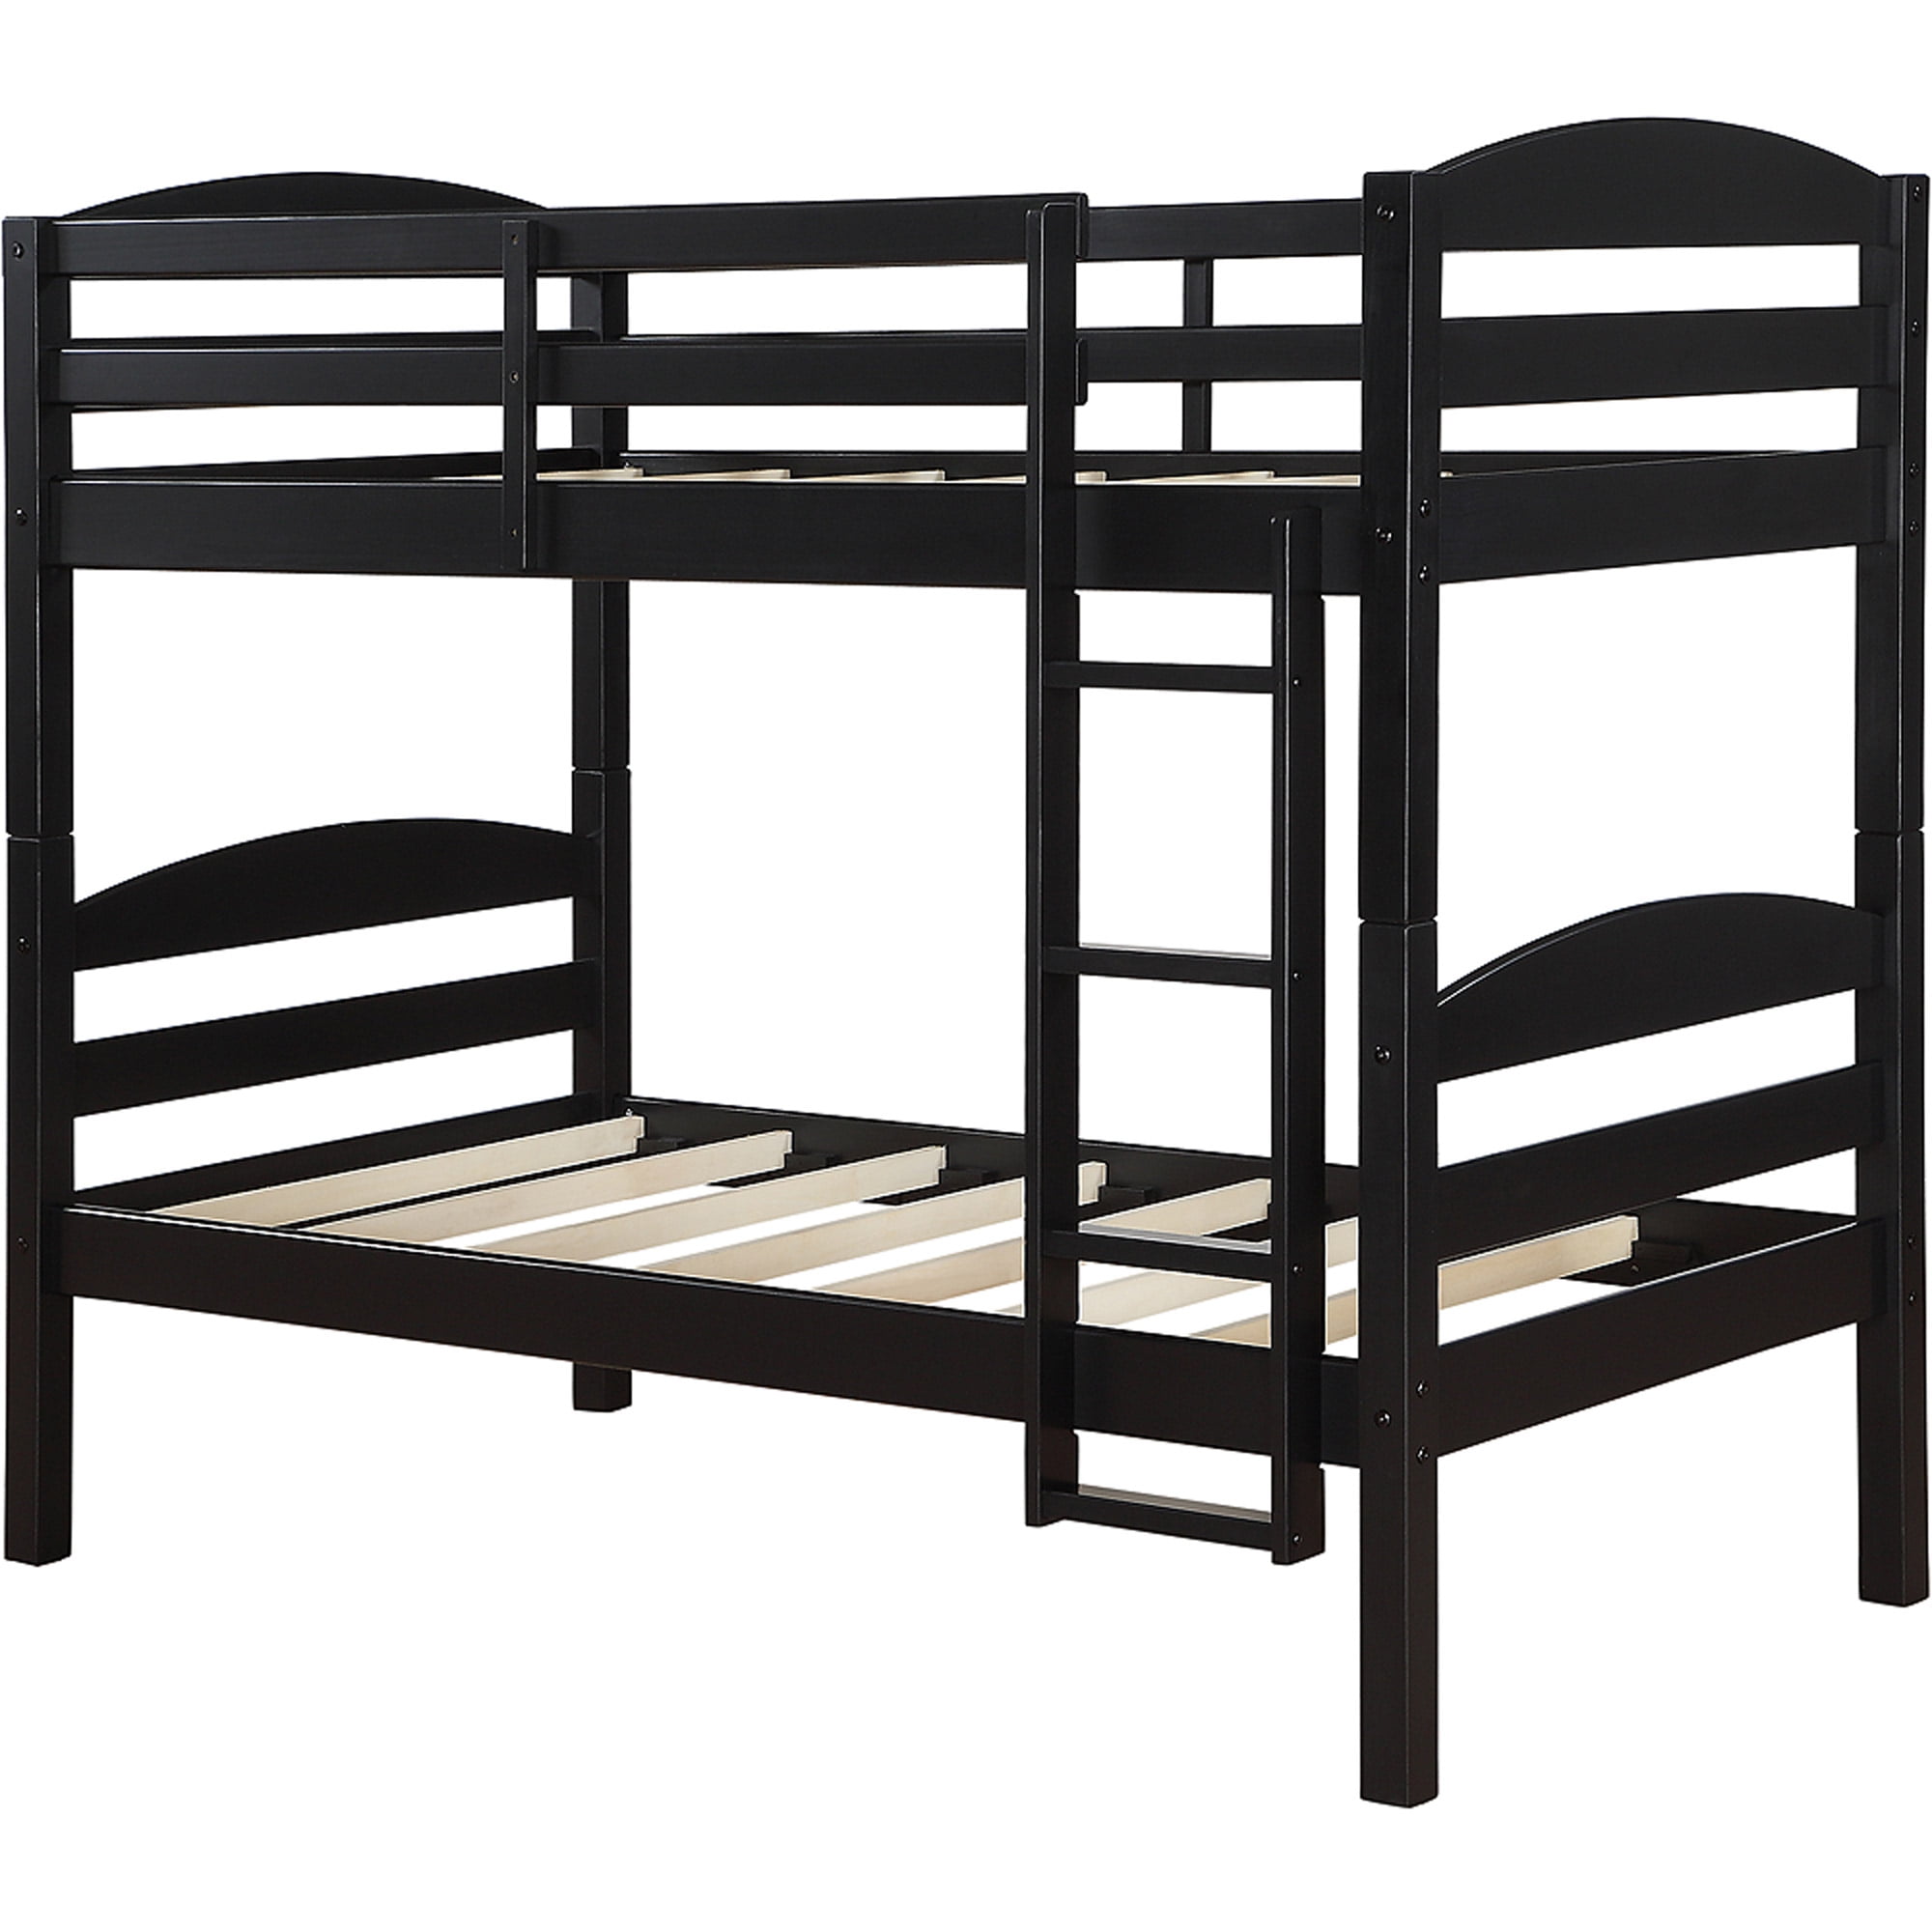 Twin Size Bunk Beds Free, Mainstays Twin Over Full Bunk Bed Instructions